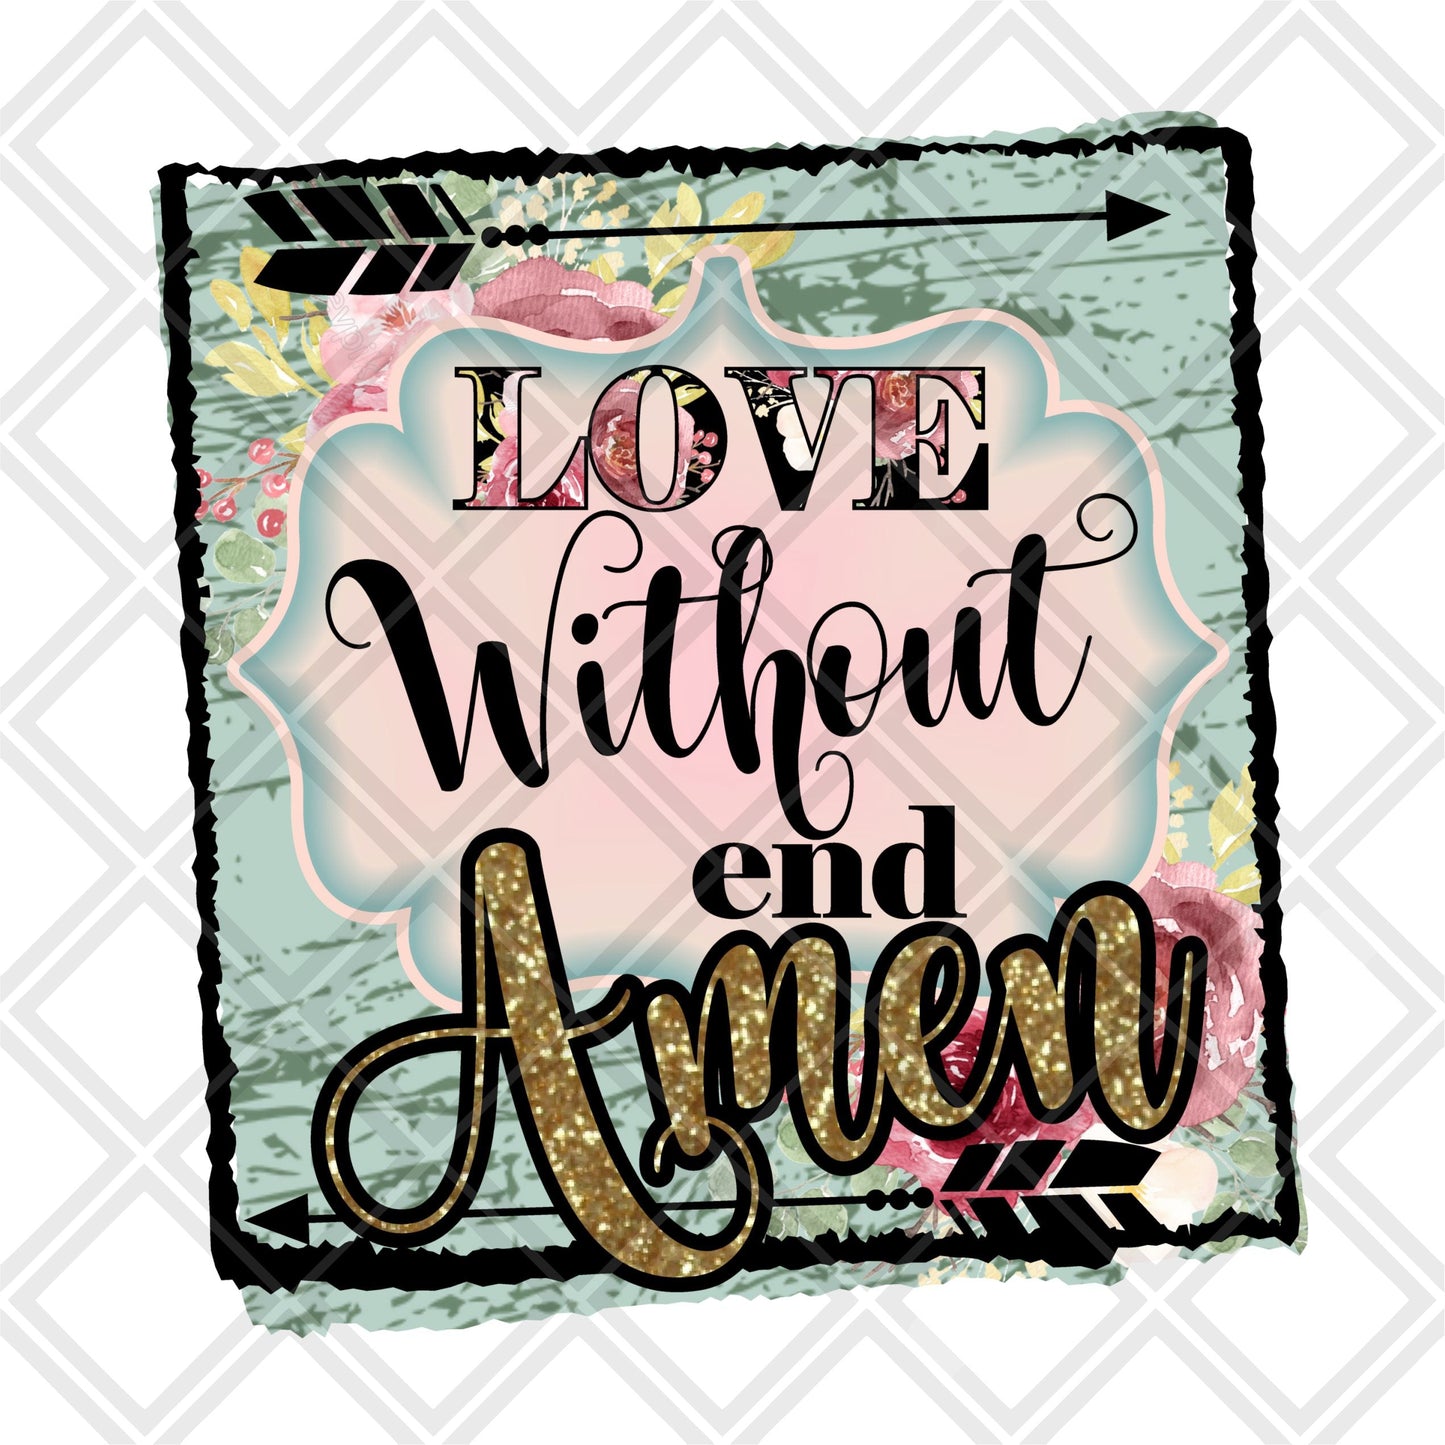 Love without end amen DTF TRANSFERPRINT TO ORDER